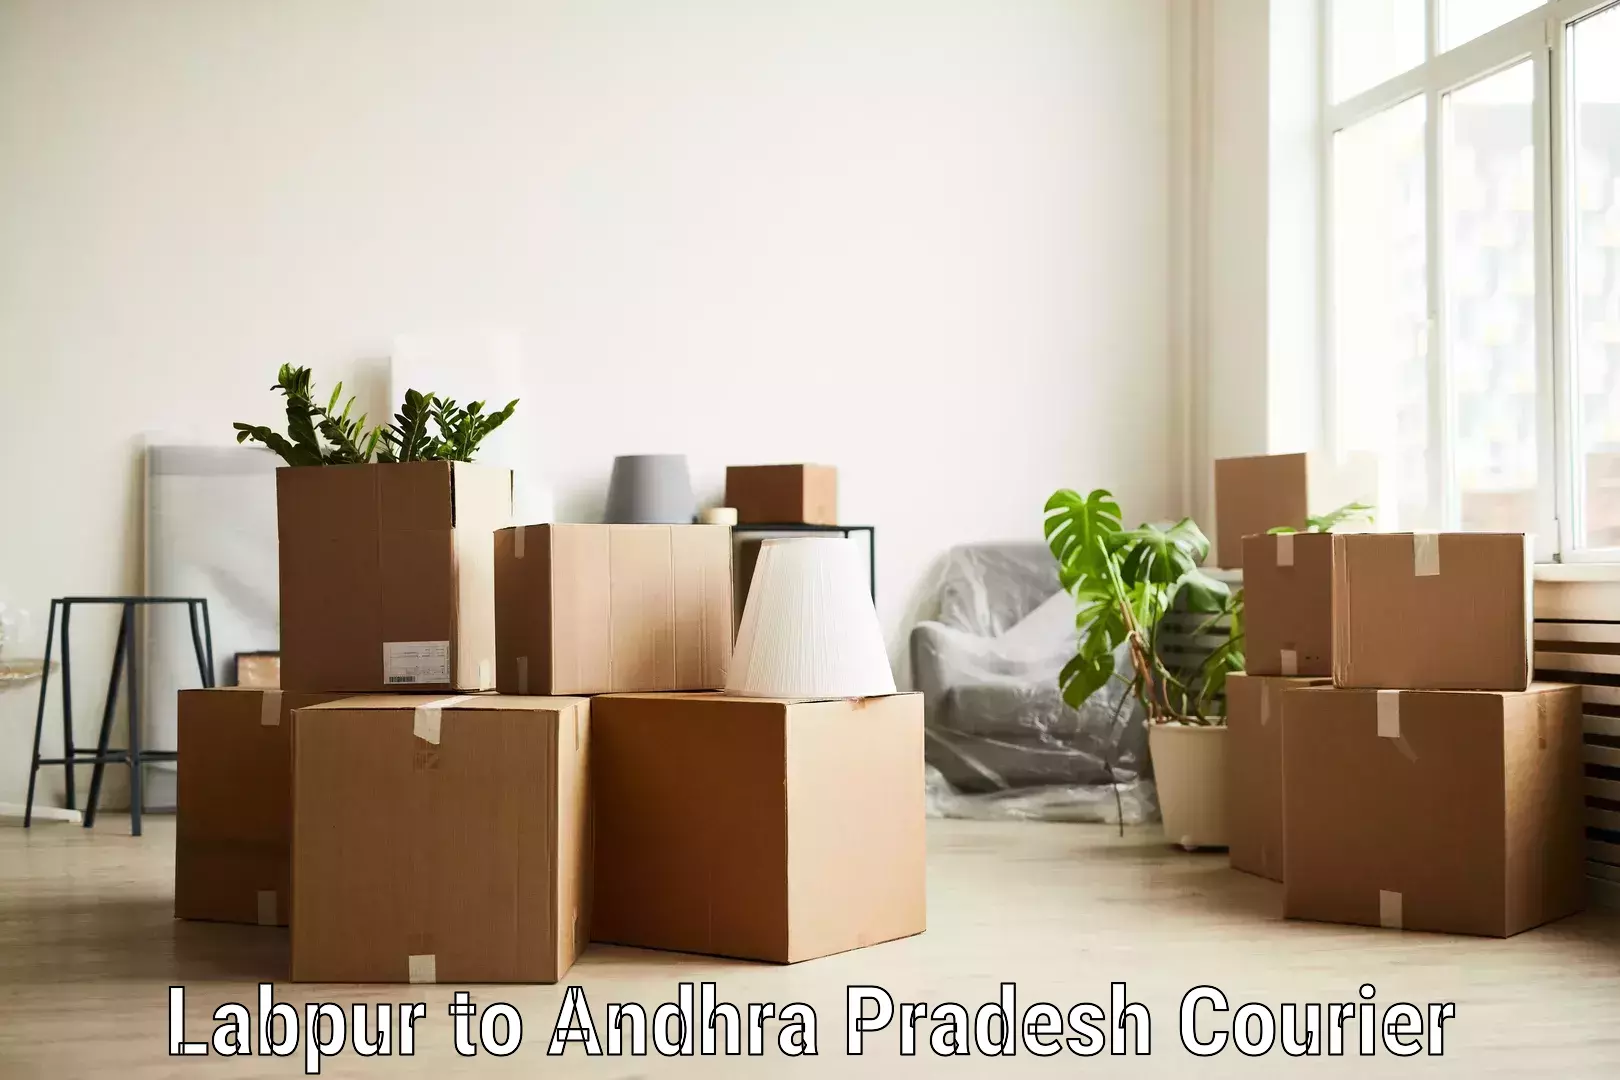 High-capacity courier solutions Labpur to Kothapalli